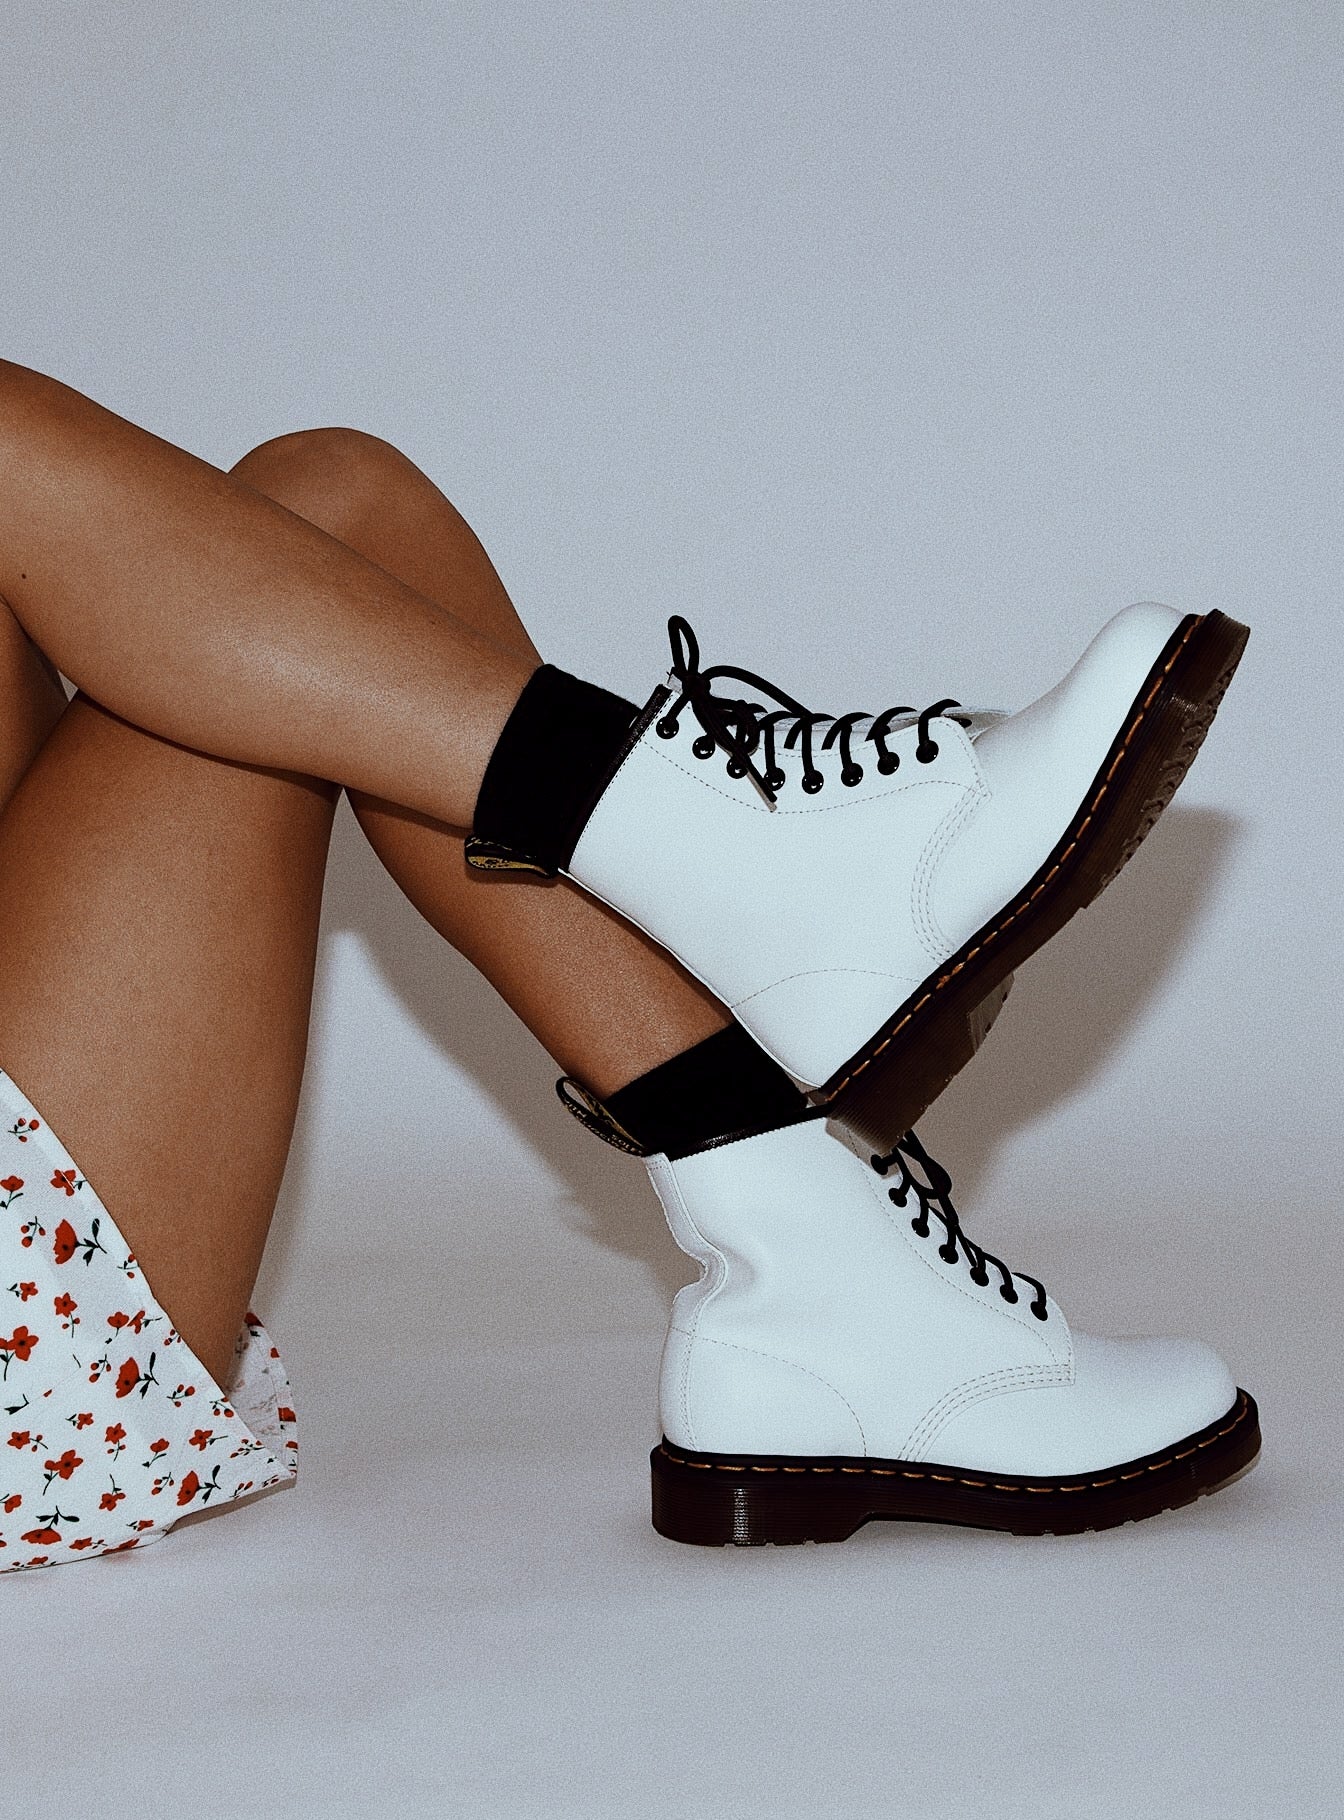 white dr martens outfit